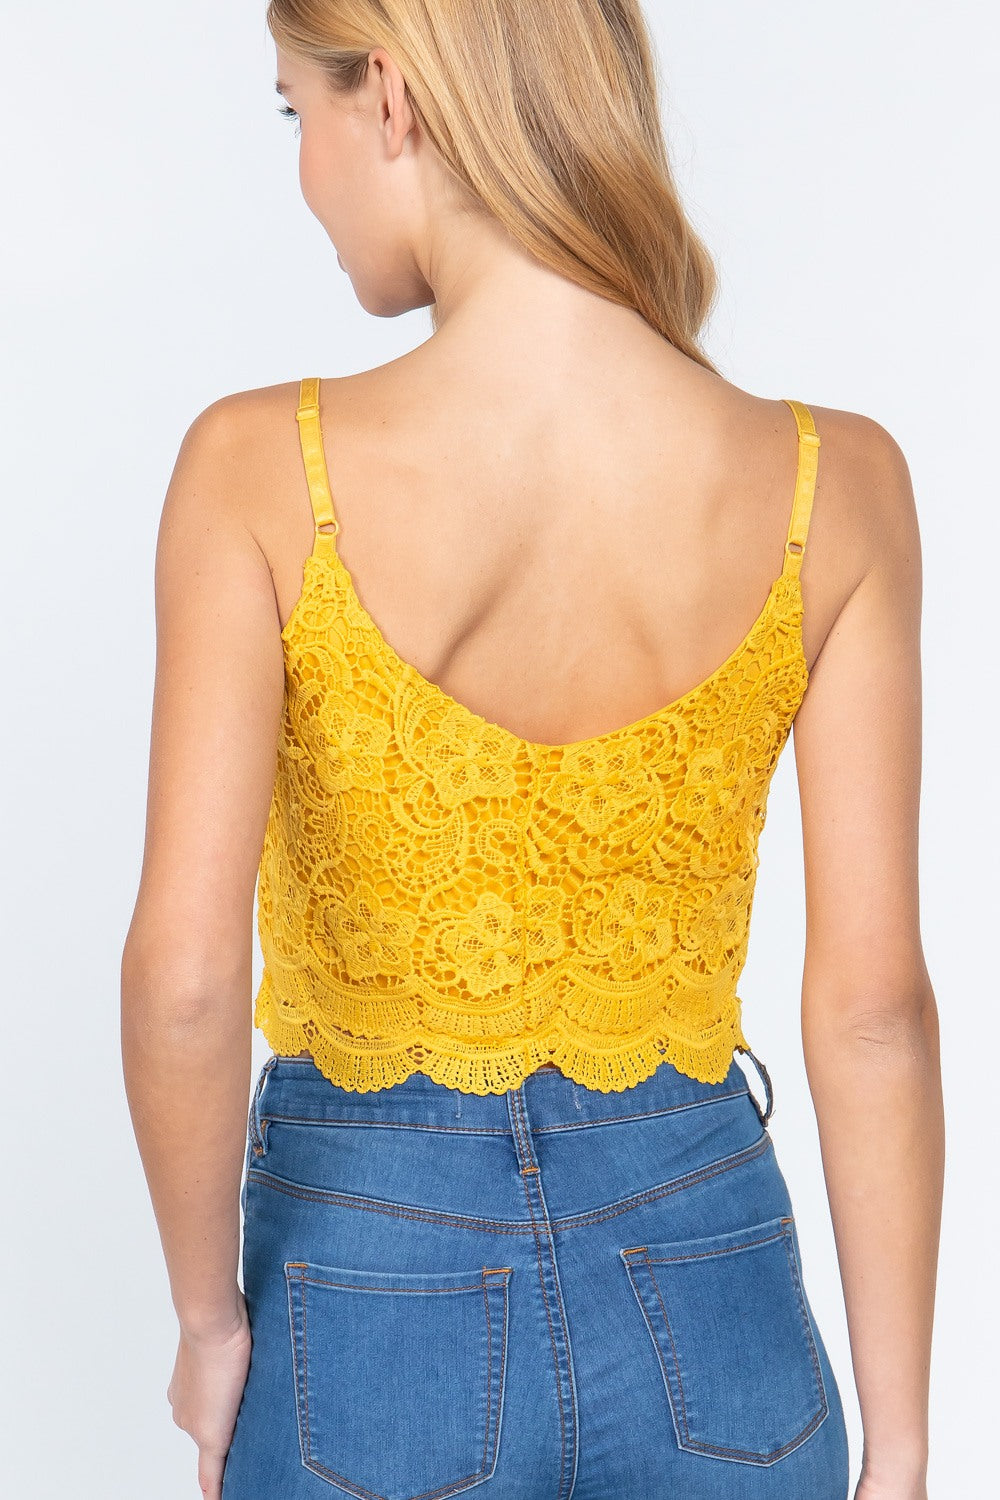 Crochet Lace Cami Woven Top - LOLA LUXE